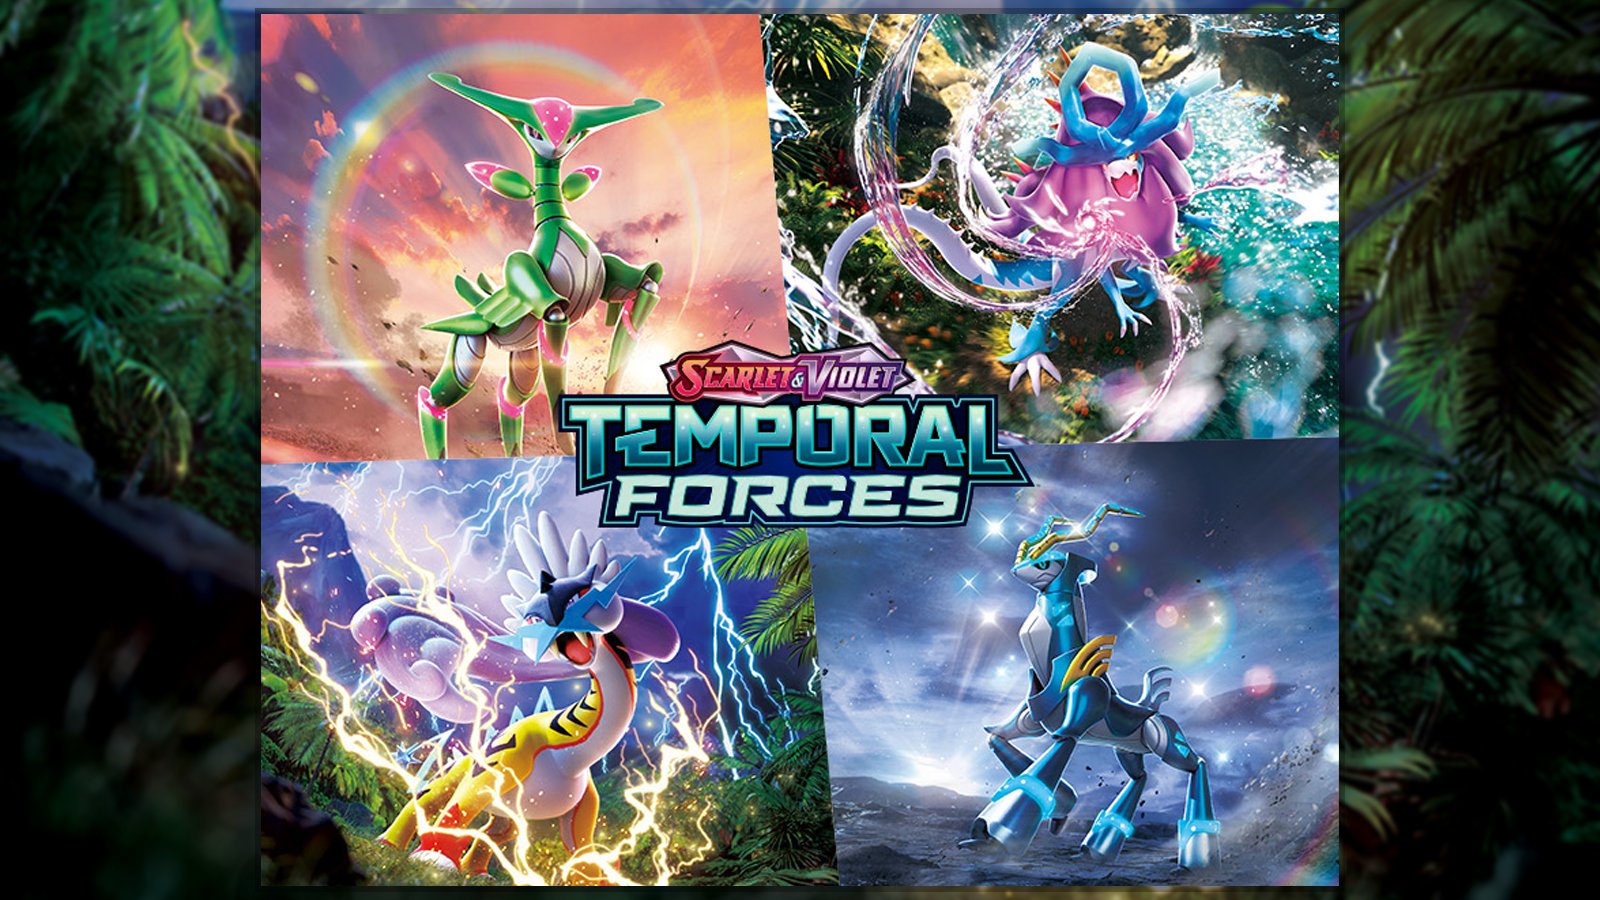 New Pokémon Trading Card Game The Temporal Forces set finally